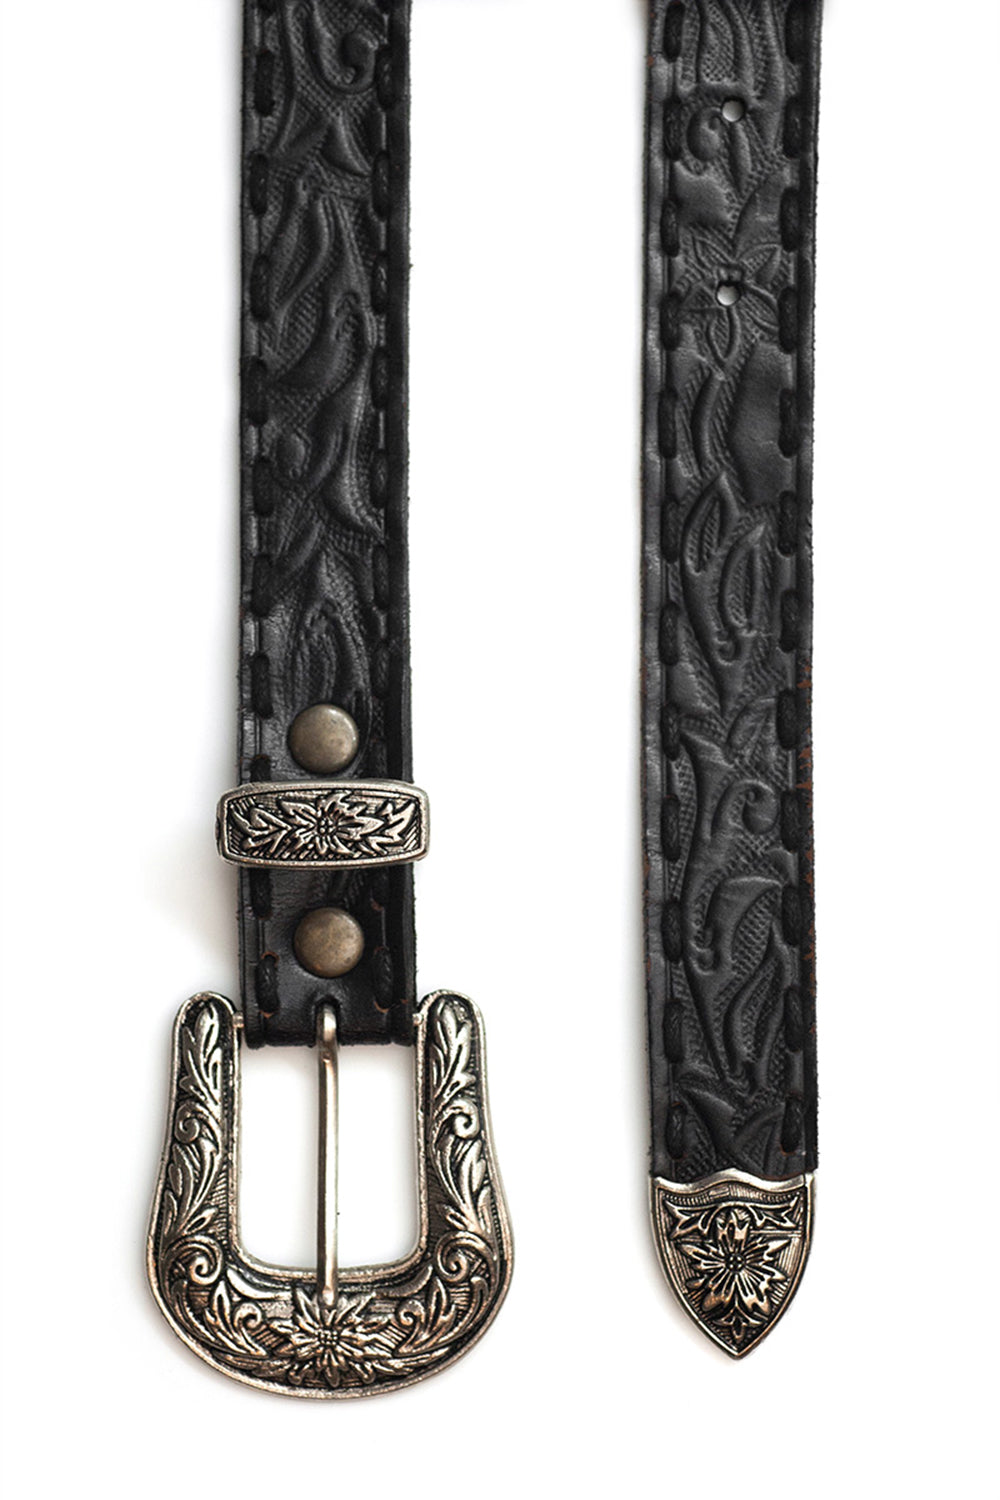 The Gypsy Queen Belt - Vintage Black - Tulle and Batiste